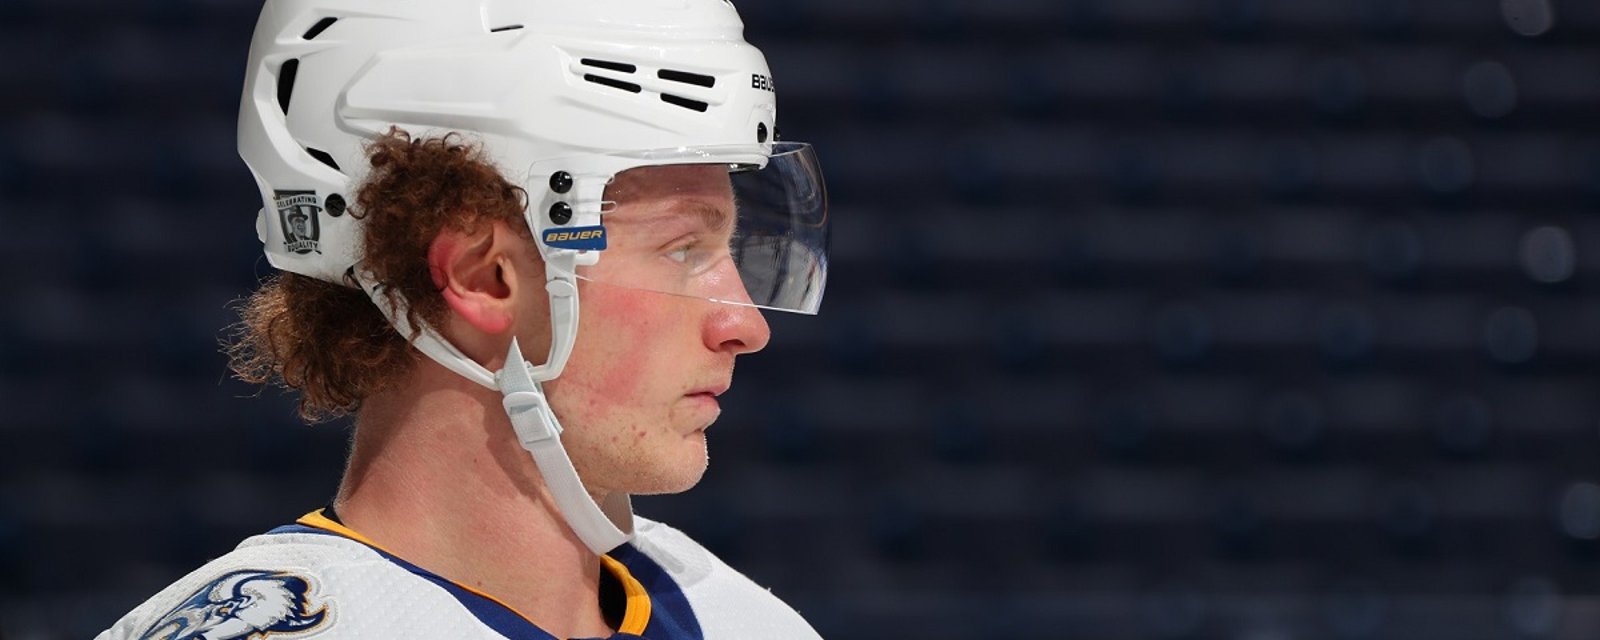 Rumor: “Conditional clauses” may be key to trading Jack Eichel.